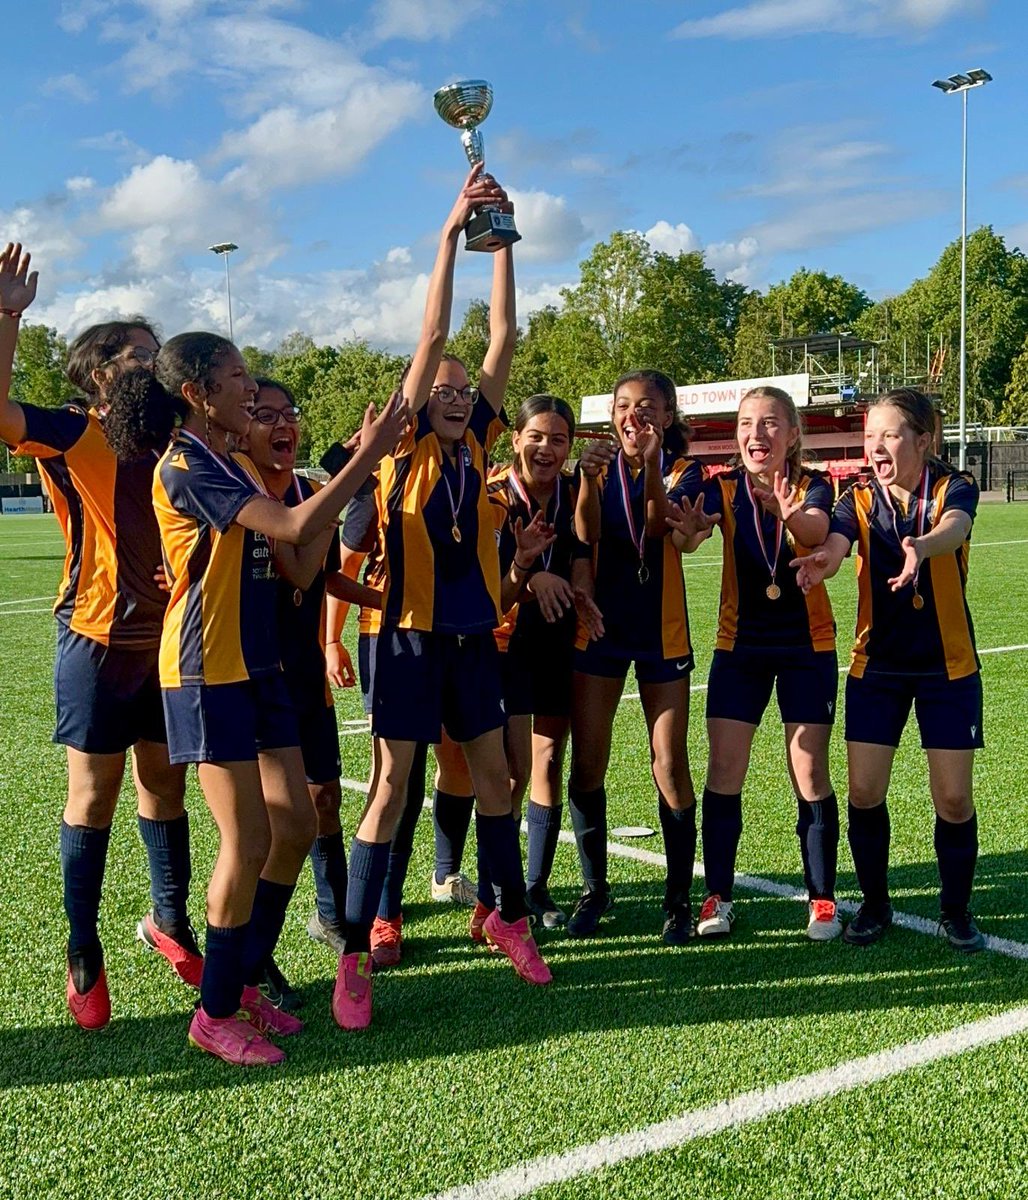 Congratulations to our U13 girls, winners of the Beaconsfield tournament today! 🏆 #OneSlough